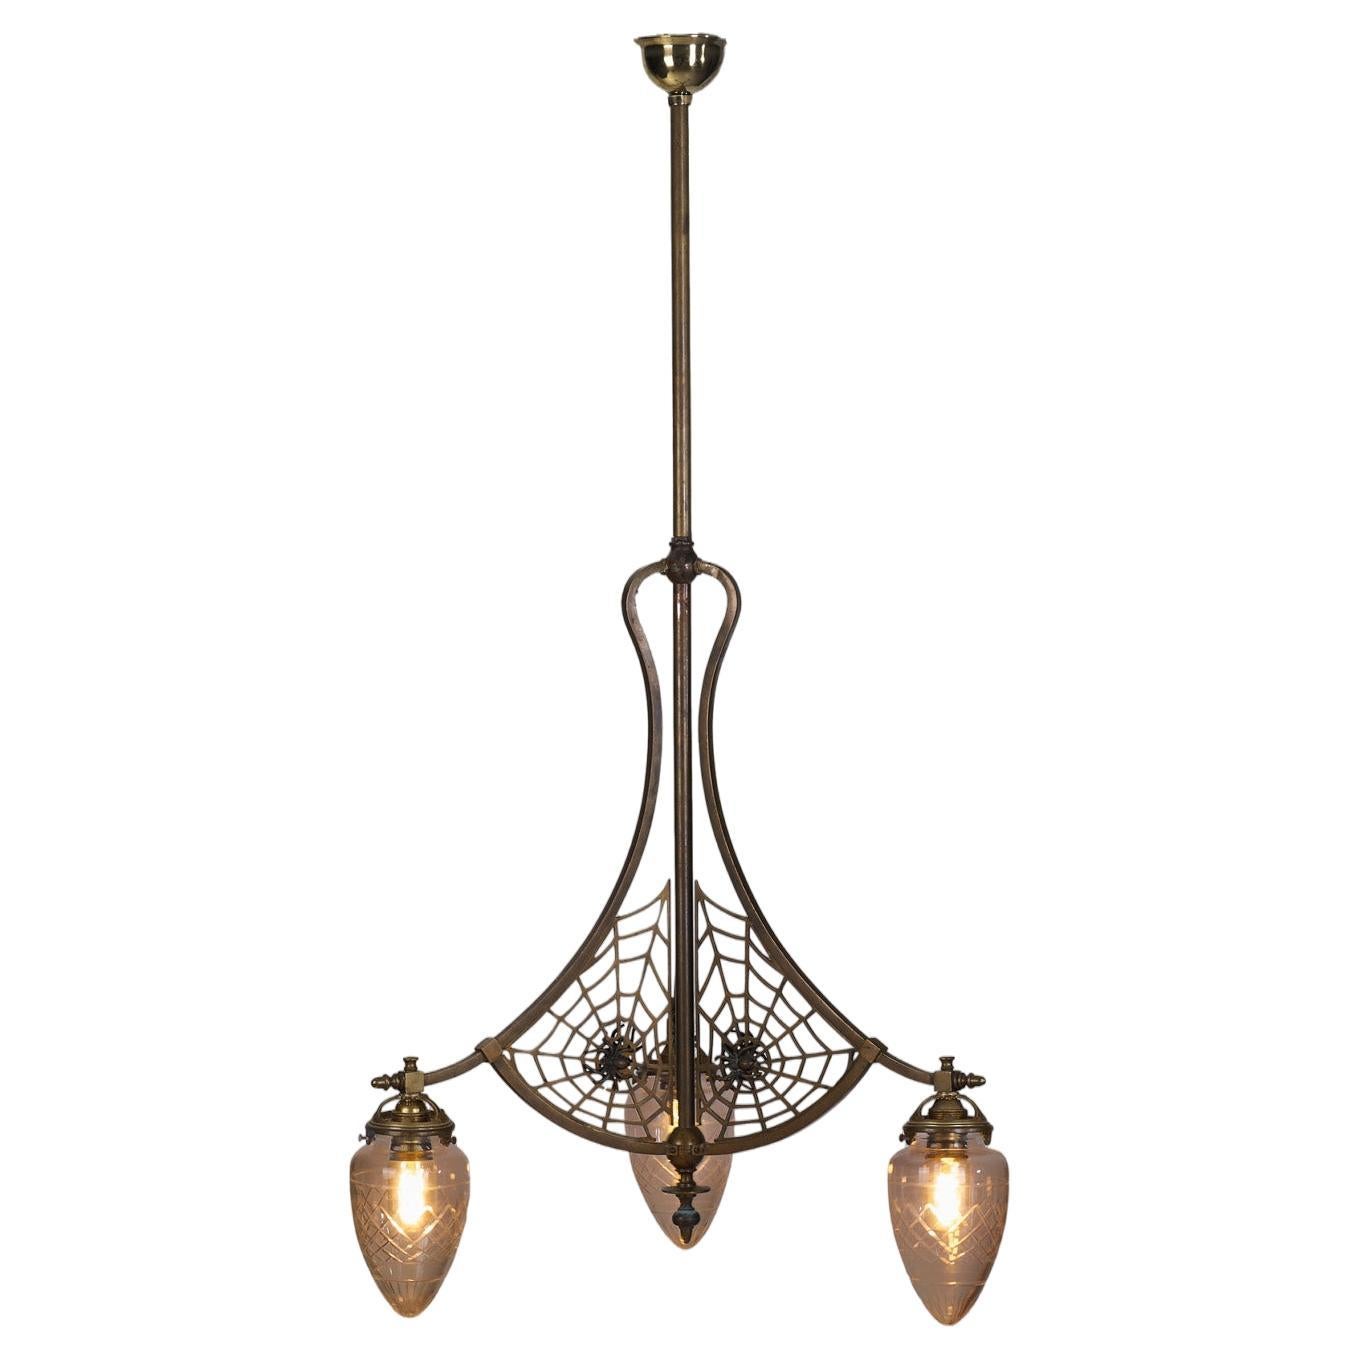 Art Nouveau Brass Ceiling Lamp with Glass Shades and Spider Nets, Europe 1900s For Sale